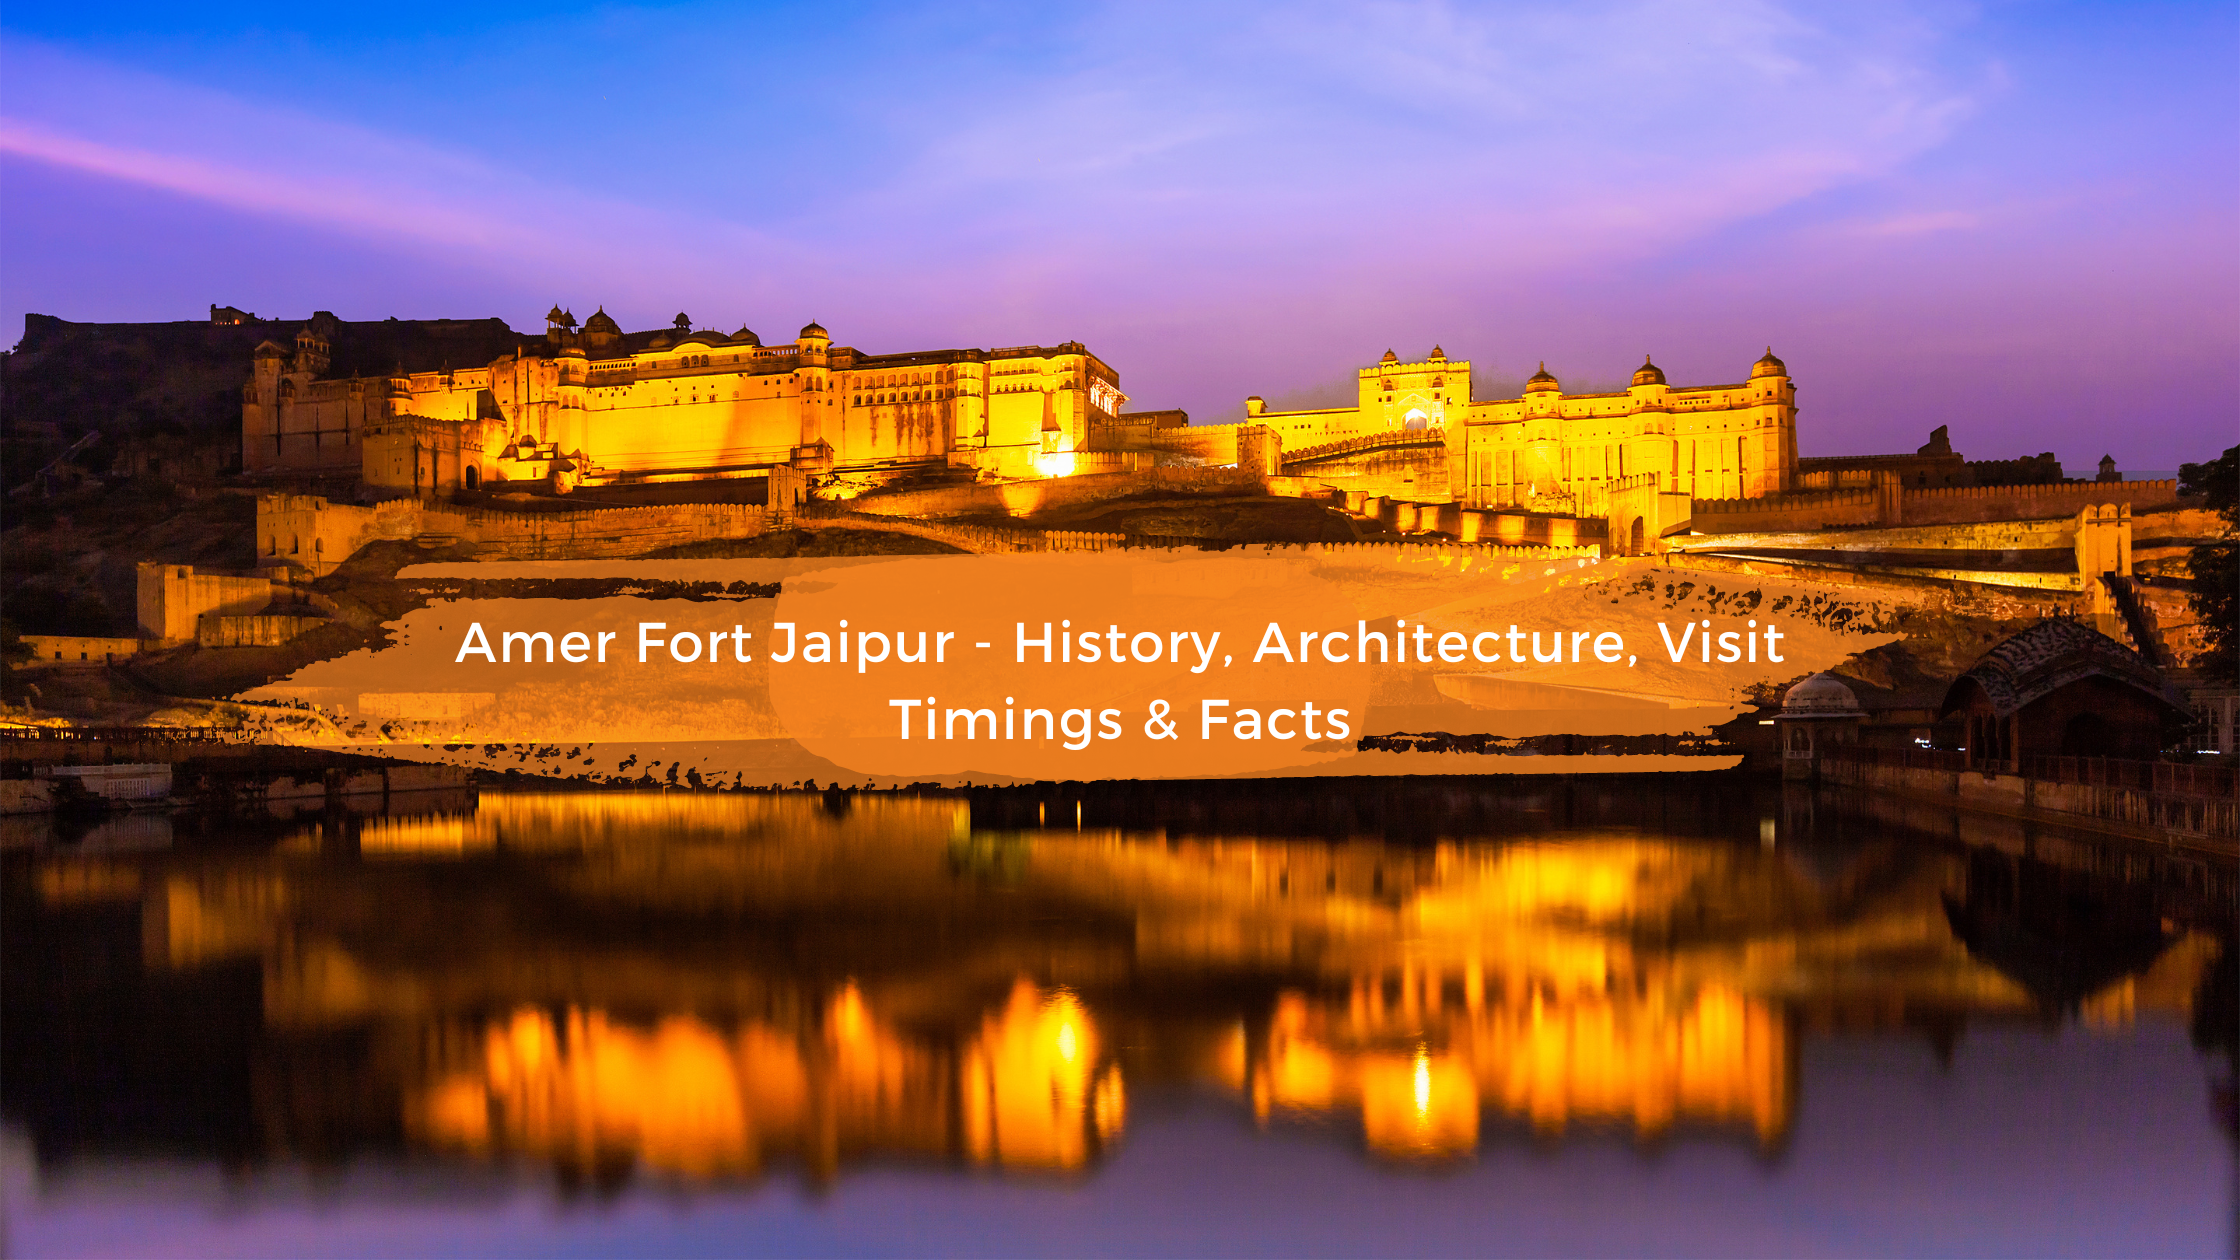 Amer Fort Jaipur - History, Architecture, Visit Timings & Facts